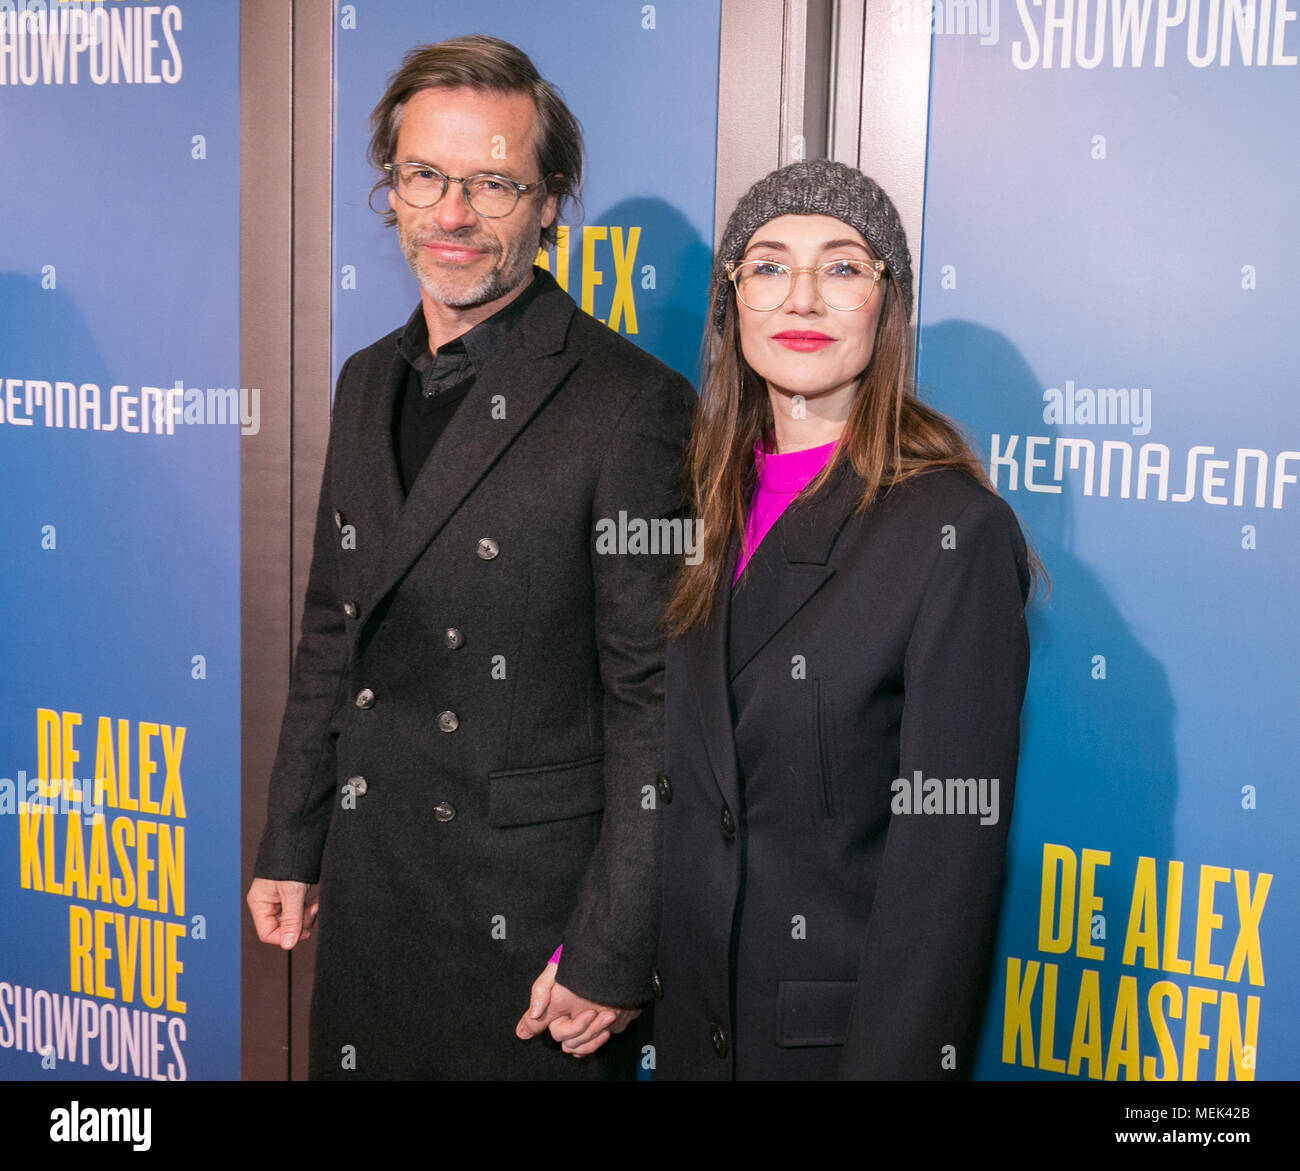 Carice van Houten and Guy Pearce attend the premiere of 'Showponies'  Featuring: Carice van Houten, Guy Pearce Where: Amsterdam, Netherlands  When: 19 Mar 2018 Credit: WENN.com **Only available for publication in UK,